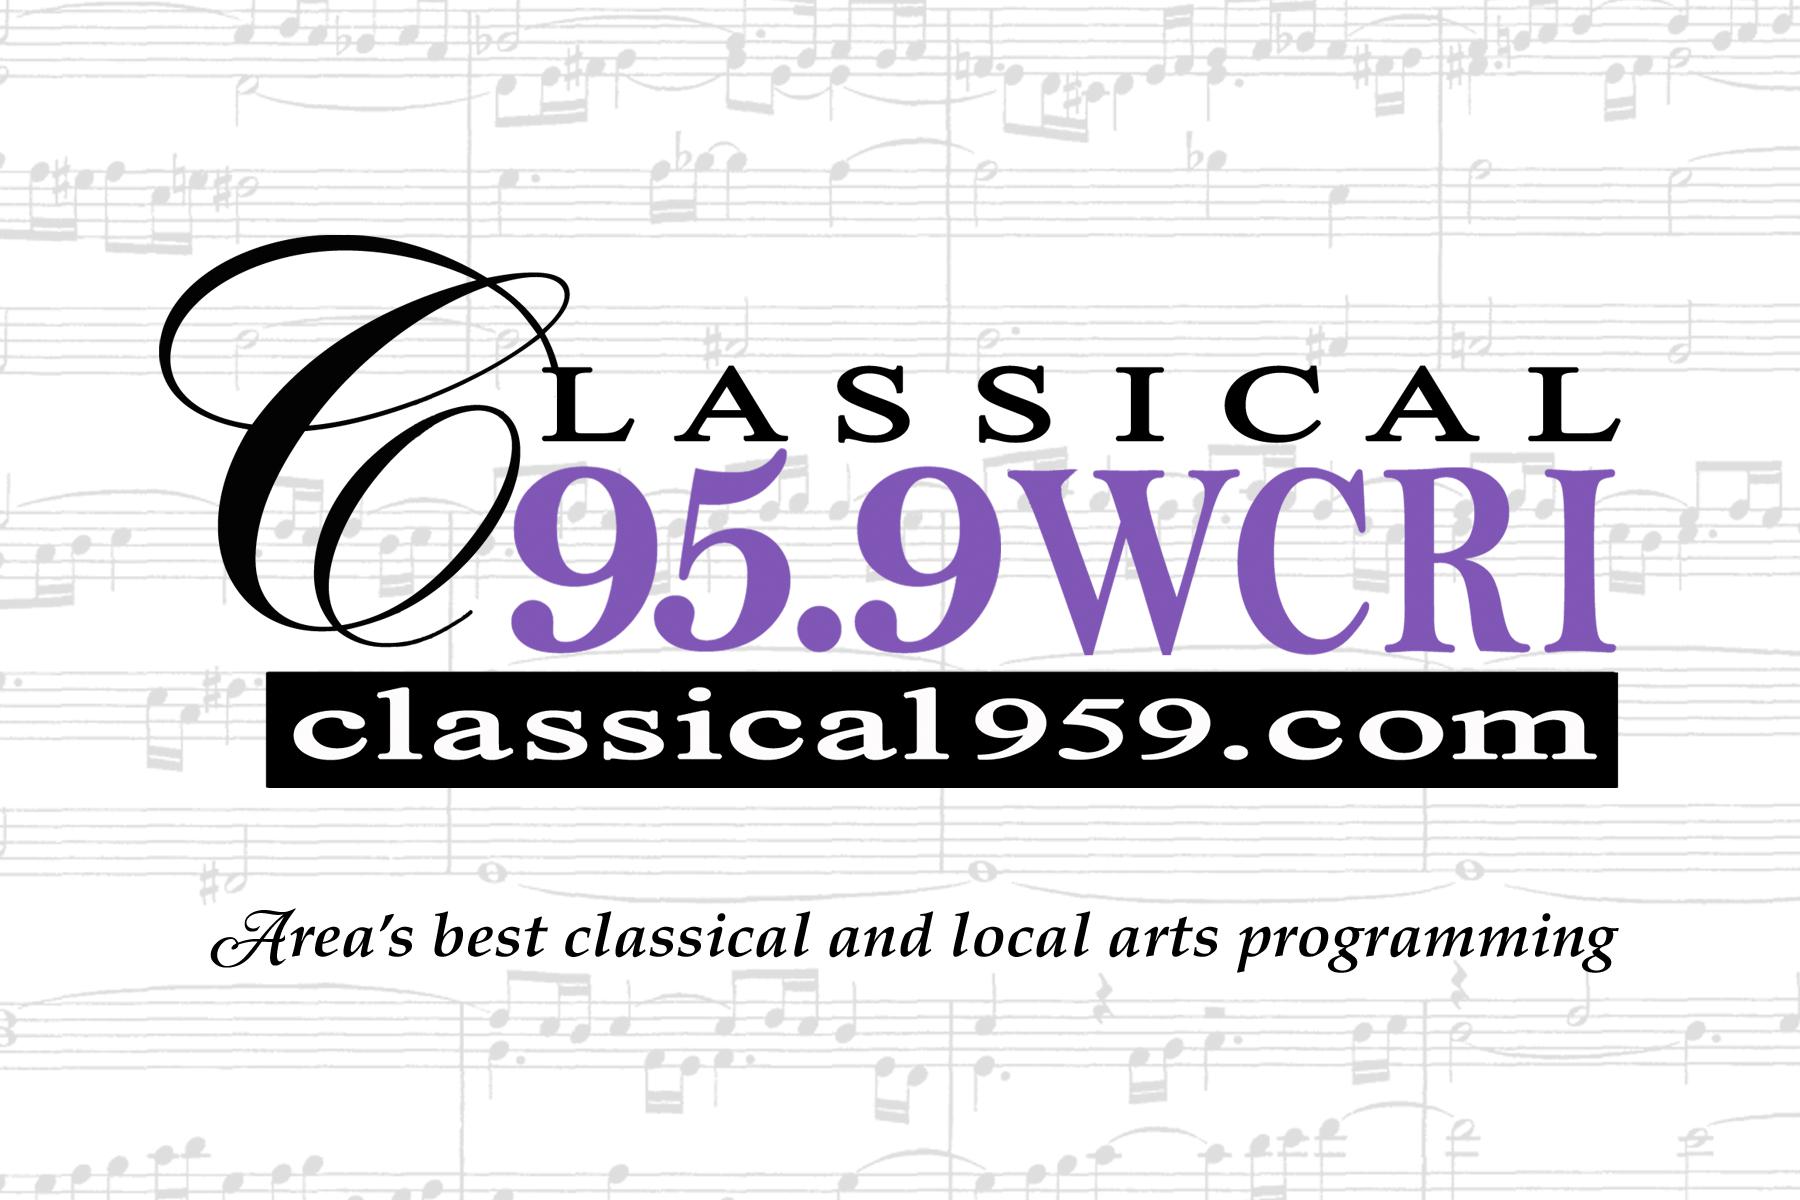 10-09-17   Chamber Music Concert on October 27th, 2017 -  WCRI’s Festival Series featuring The Newport Music Festival